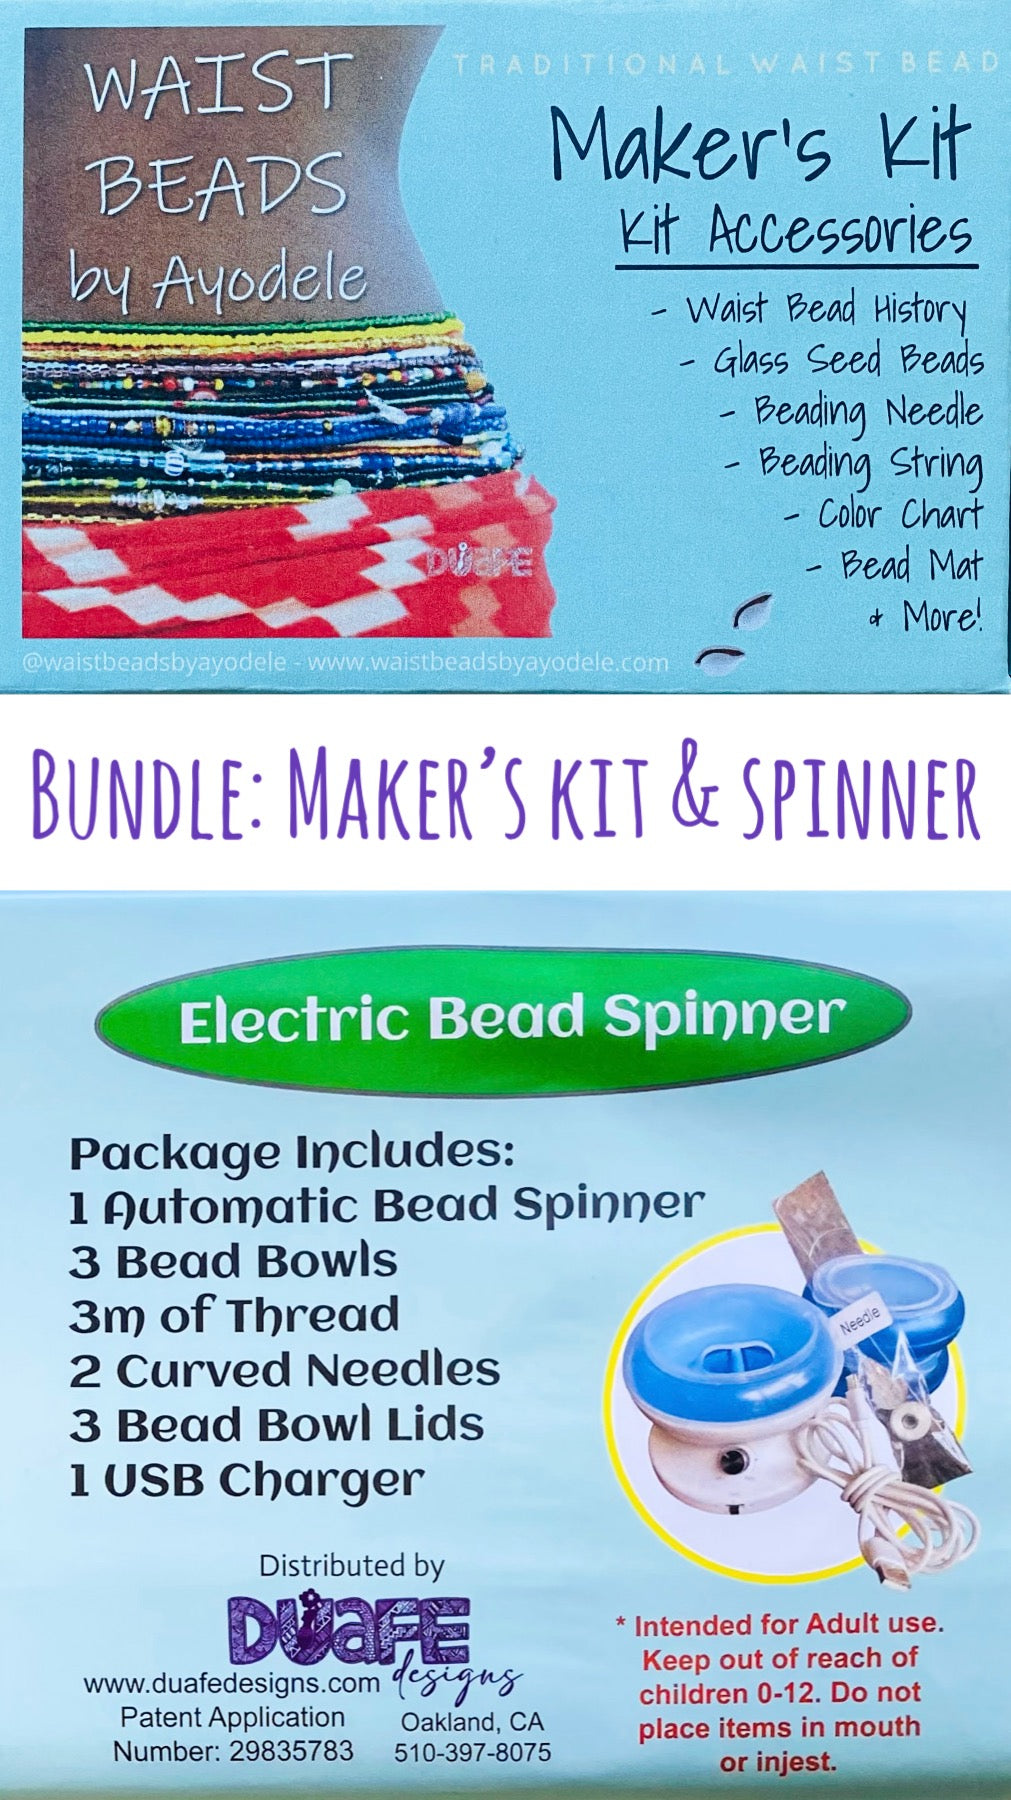 Bent Needle for Bead Spinner (pack/2)